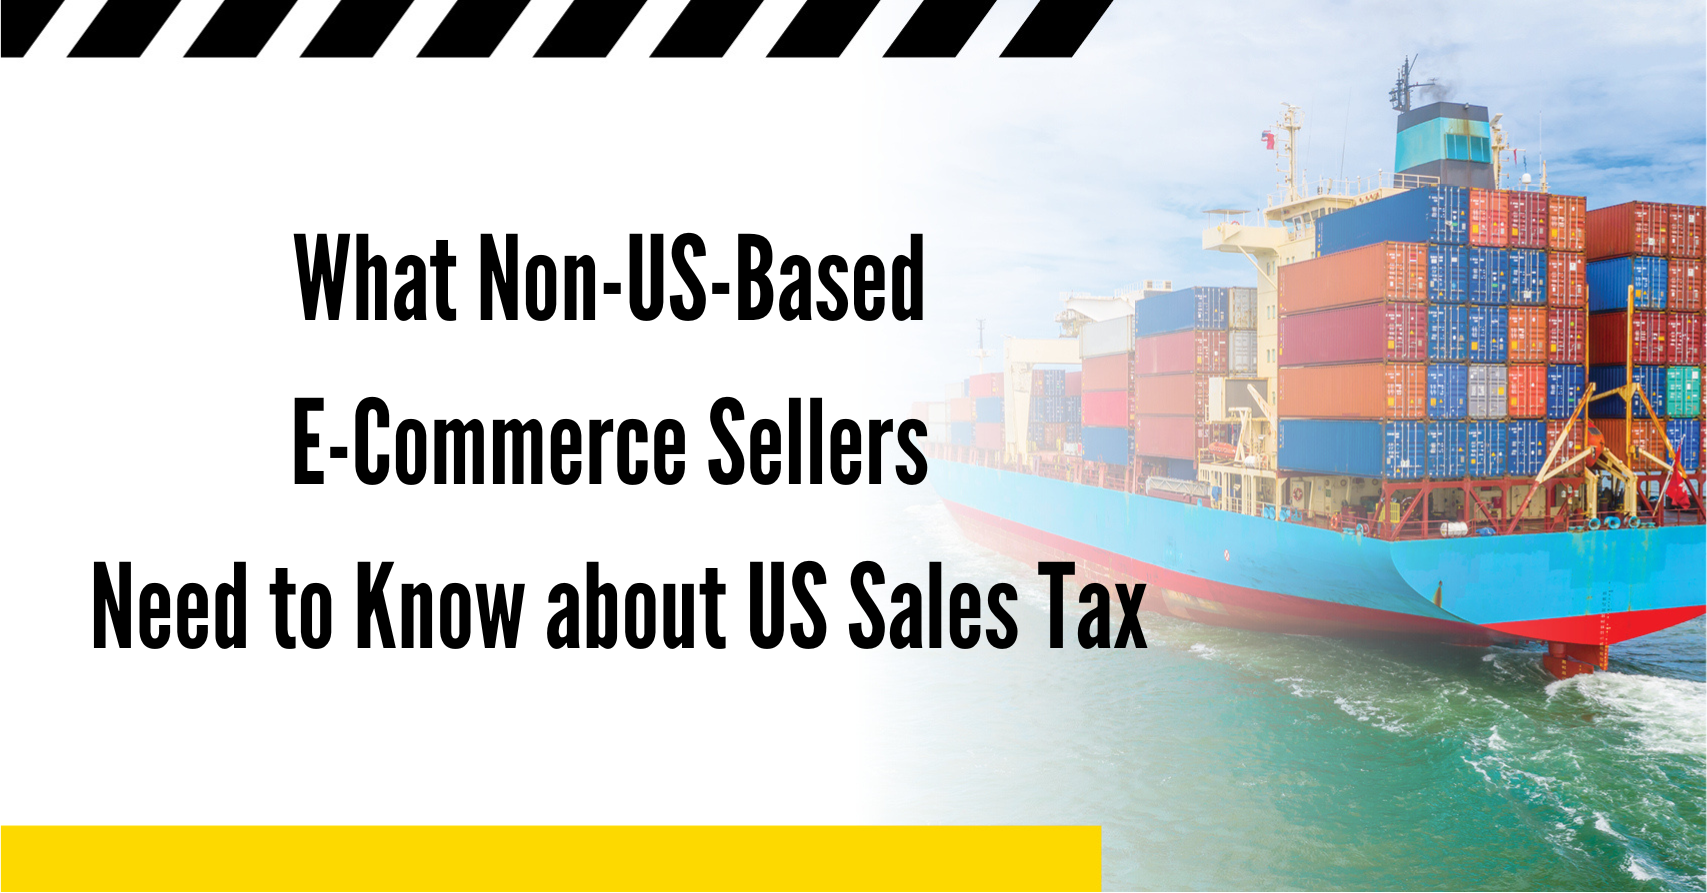 What non-US-based e-commerce sellers need to know about US sales tax